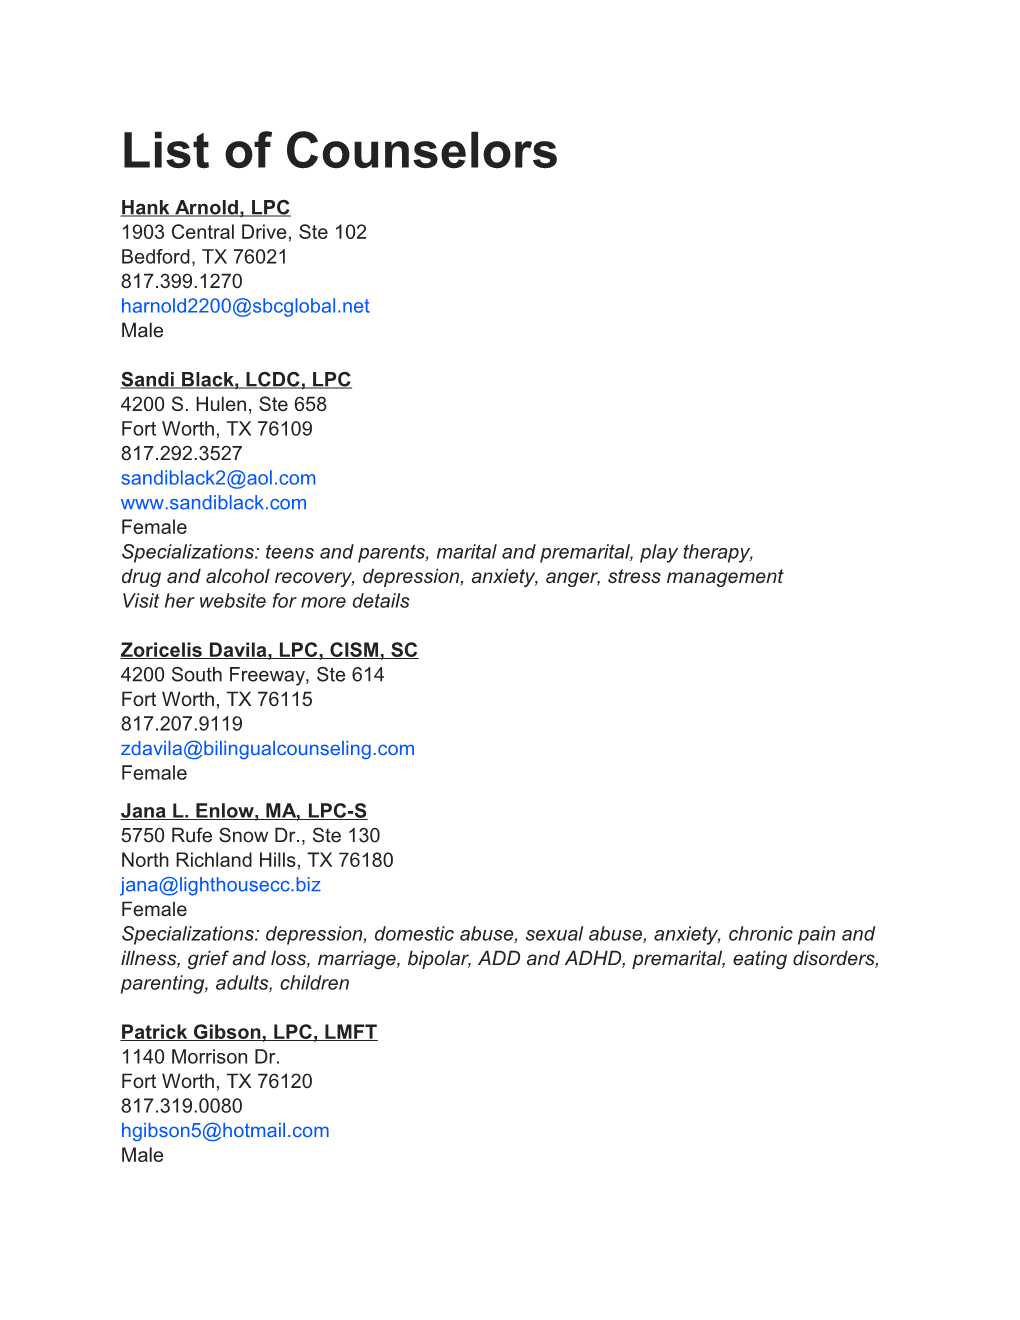 List of Counselors